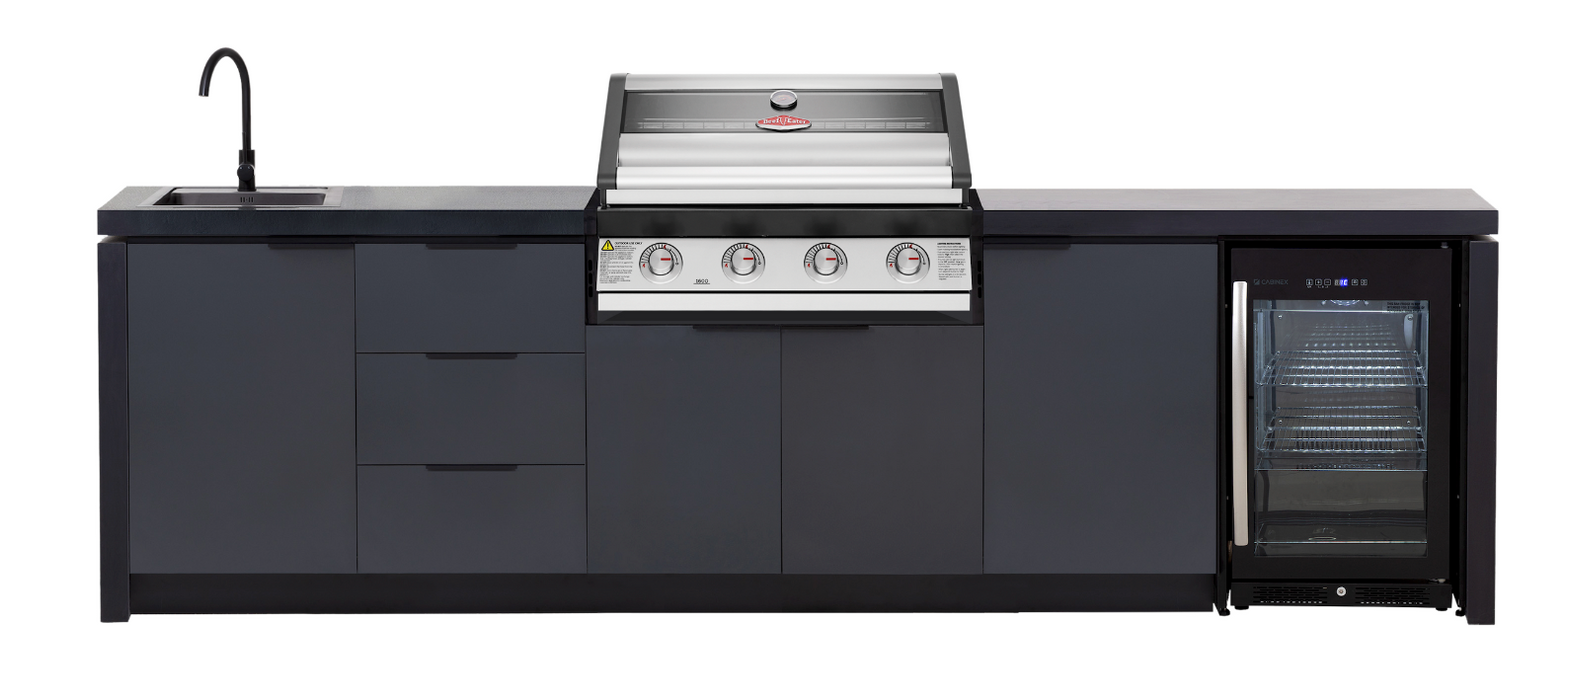 Beefeater Cabinex 1600S Series 4 burner Outdoor kitchen with fridge and Sink